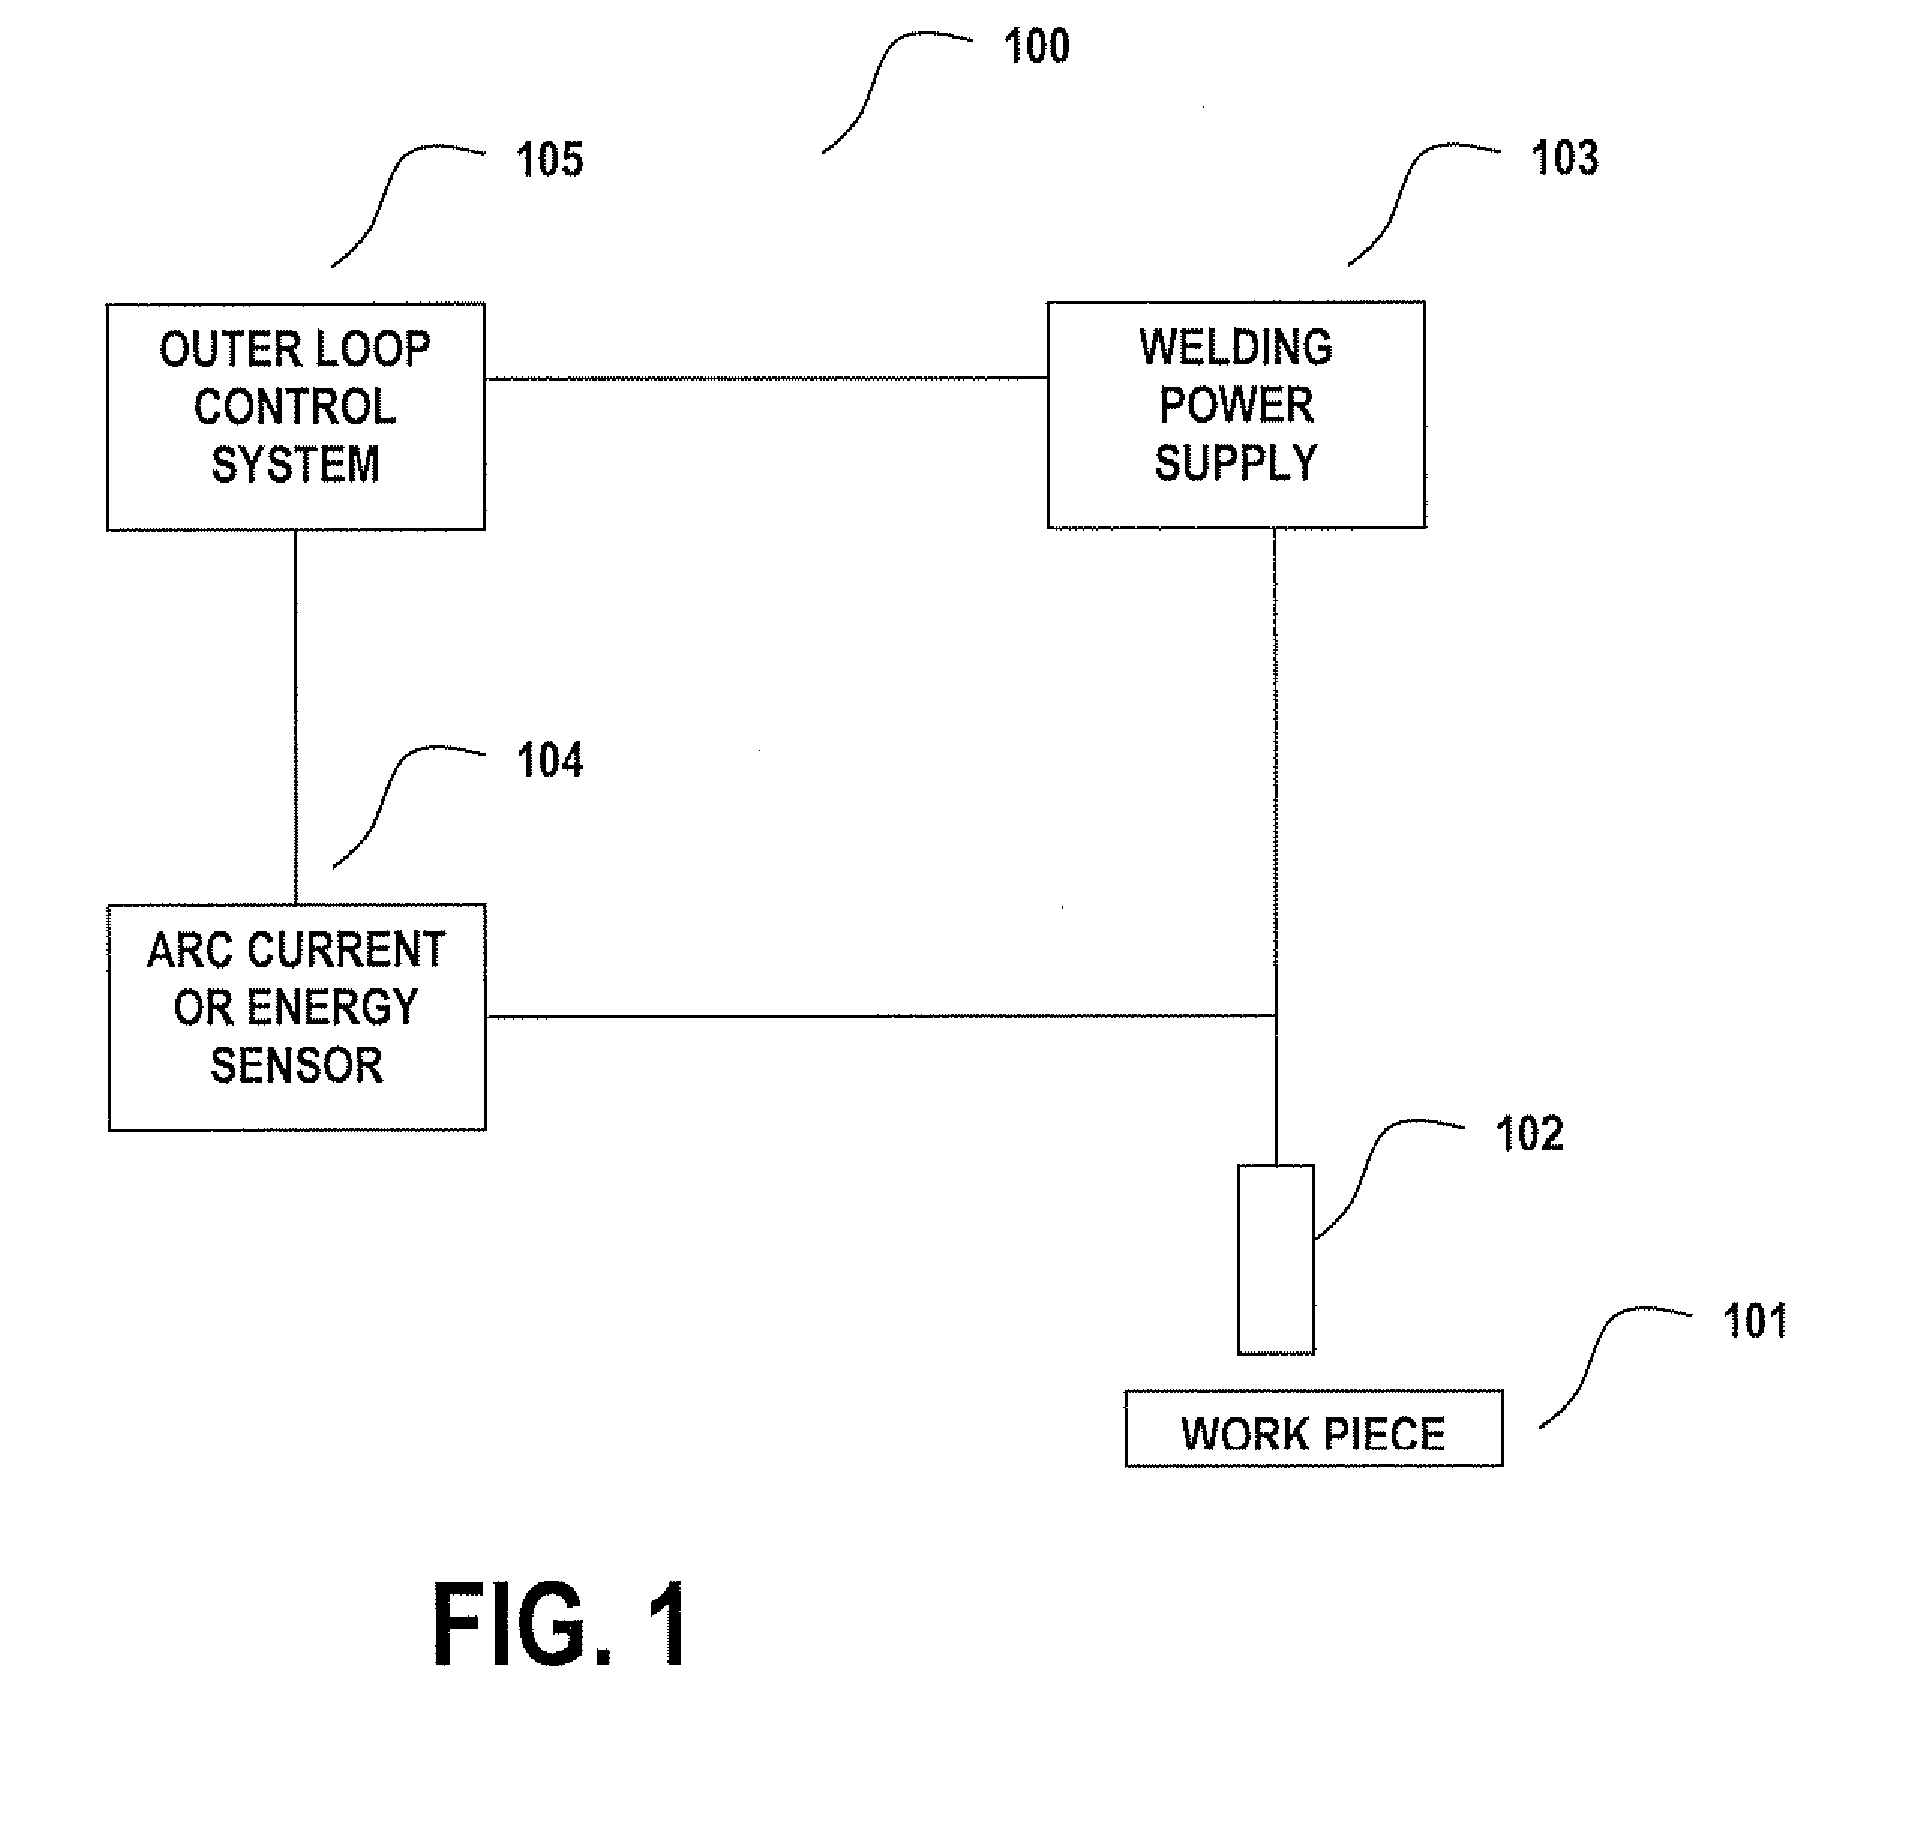 Outer-loop control for use with nickel and duplex stainless steel filler alloys and carbon dioxide containing shielding gas